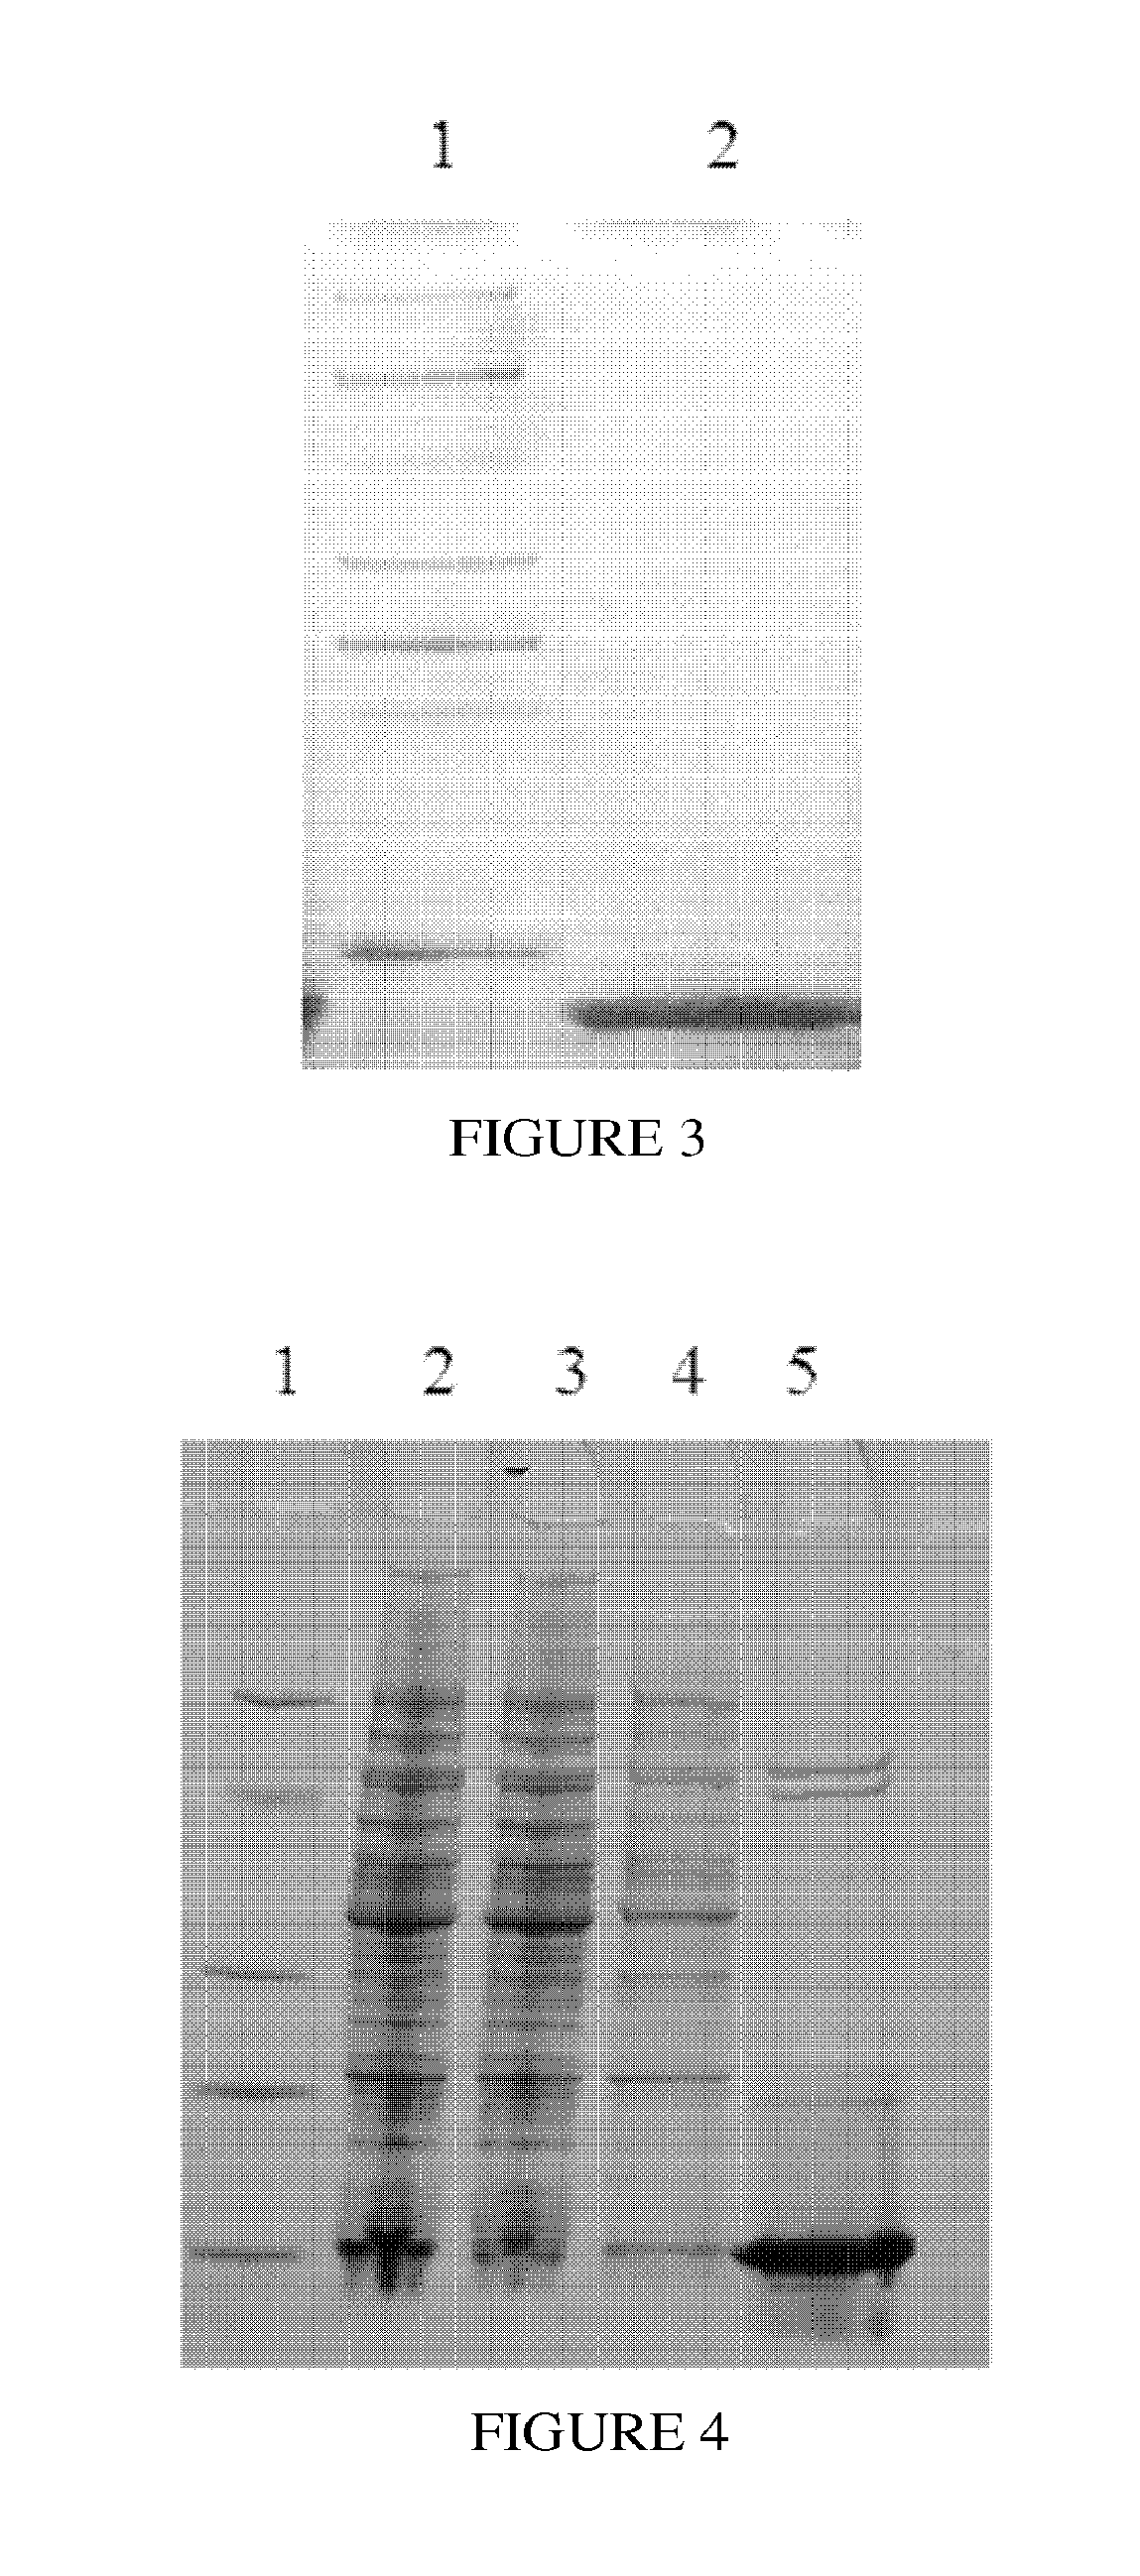 Protein a mutants having high alkali resistance and methods of use thereof